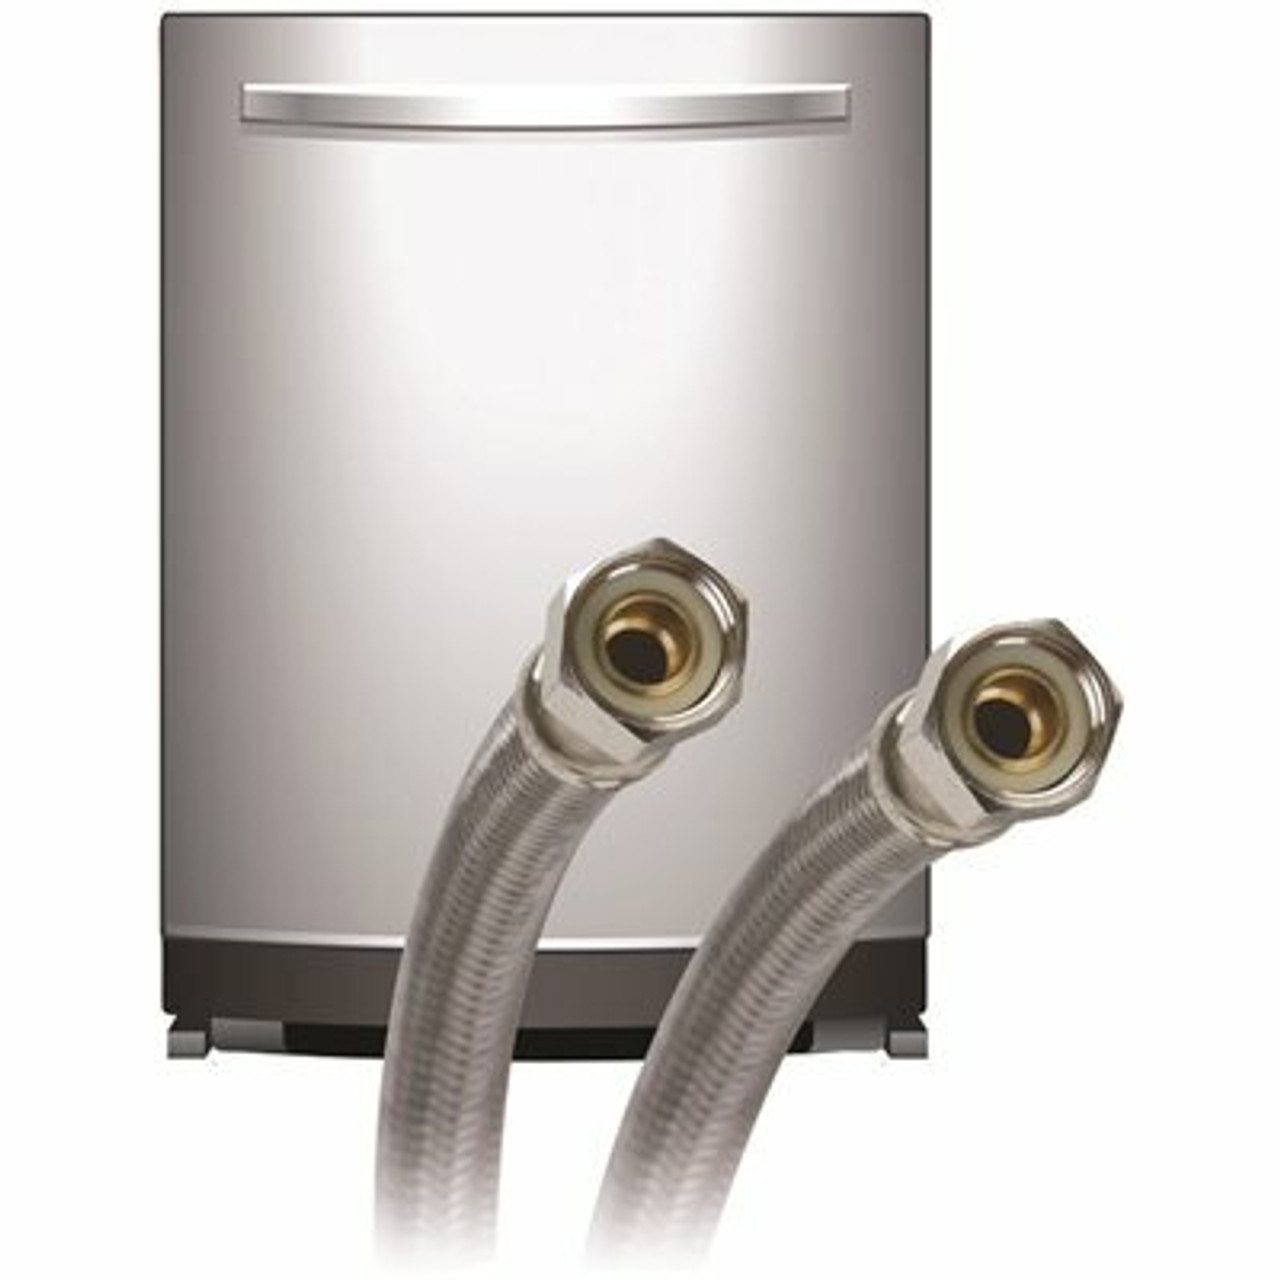 3/8 In. Compression X 3/8 In. Compression X 60 In. L Braided Stainless Steel Dishwasher Connector With Elbow Included